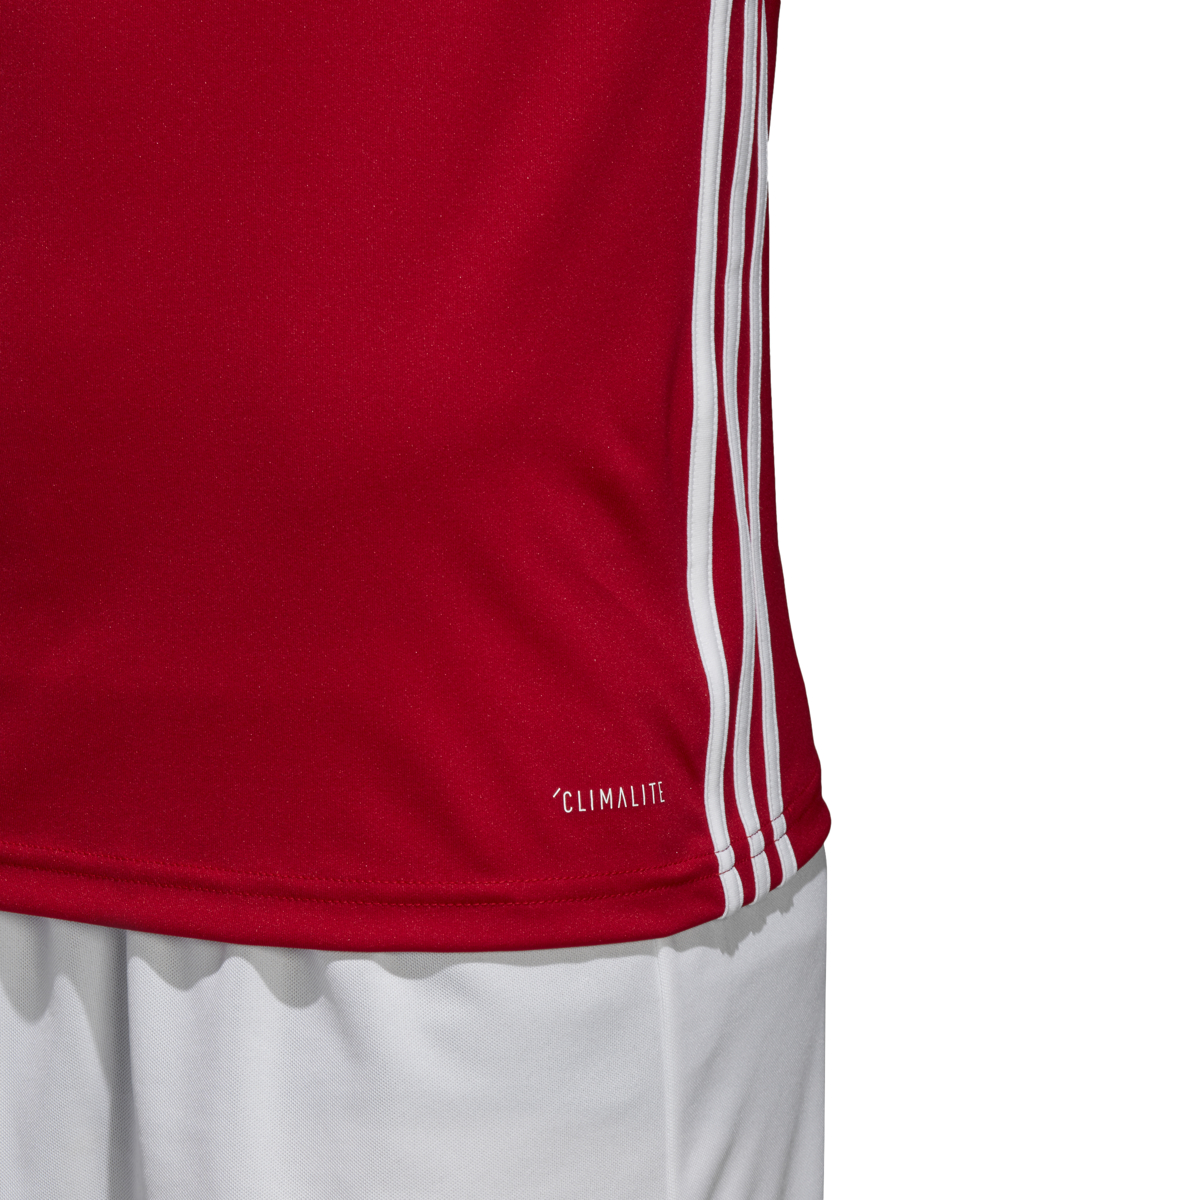 Adidas Mens Soccer Regista 18 Jersey Adidas - Ships Directly From Adidas - image 4 of 6